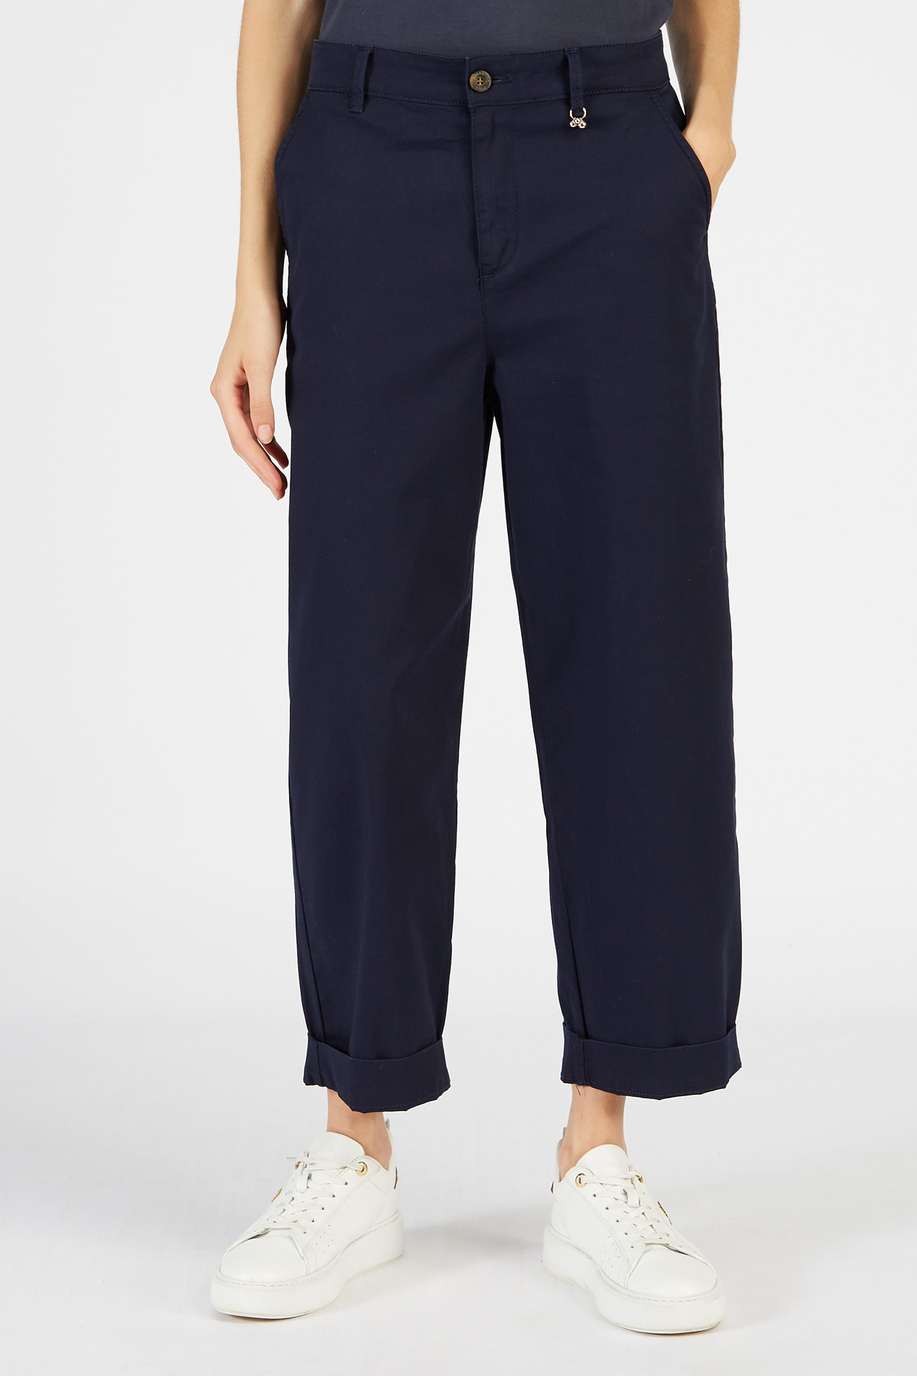 Women’s high-waisted trousers with narrow bottom - Winter looks for her | La Martina - Official Online Shop